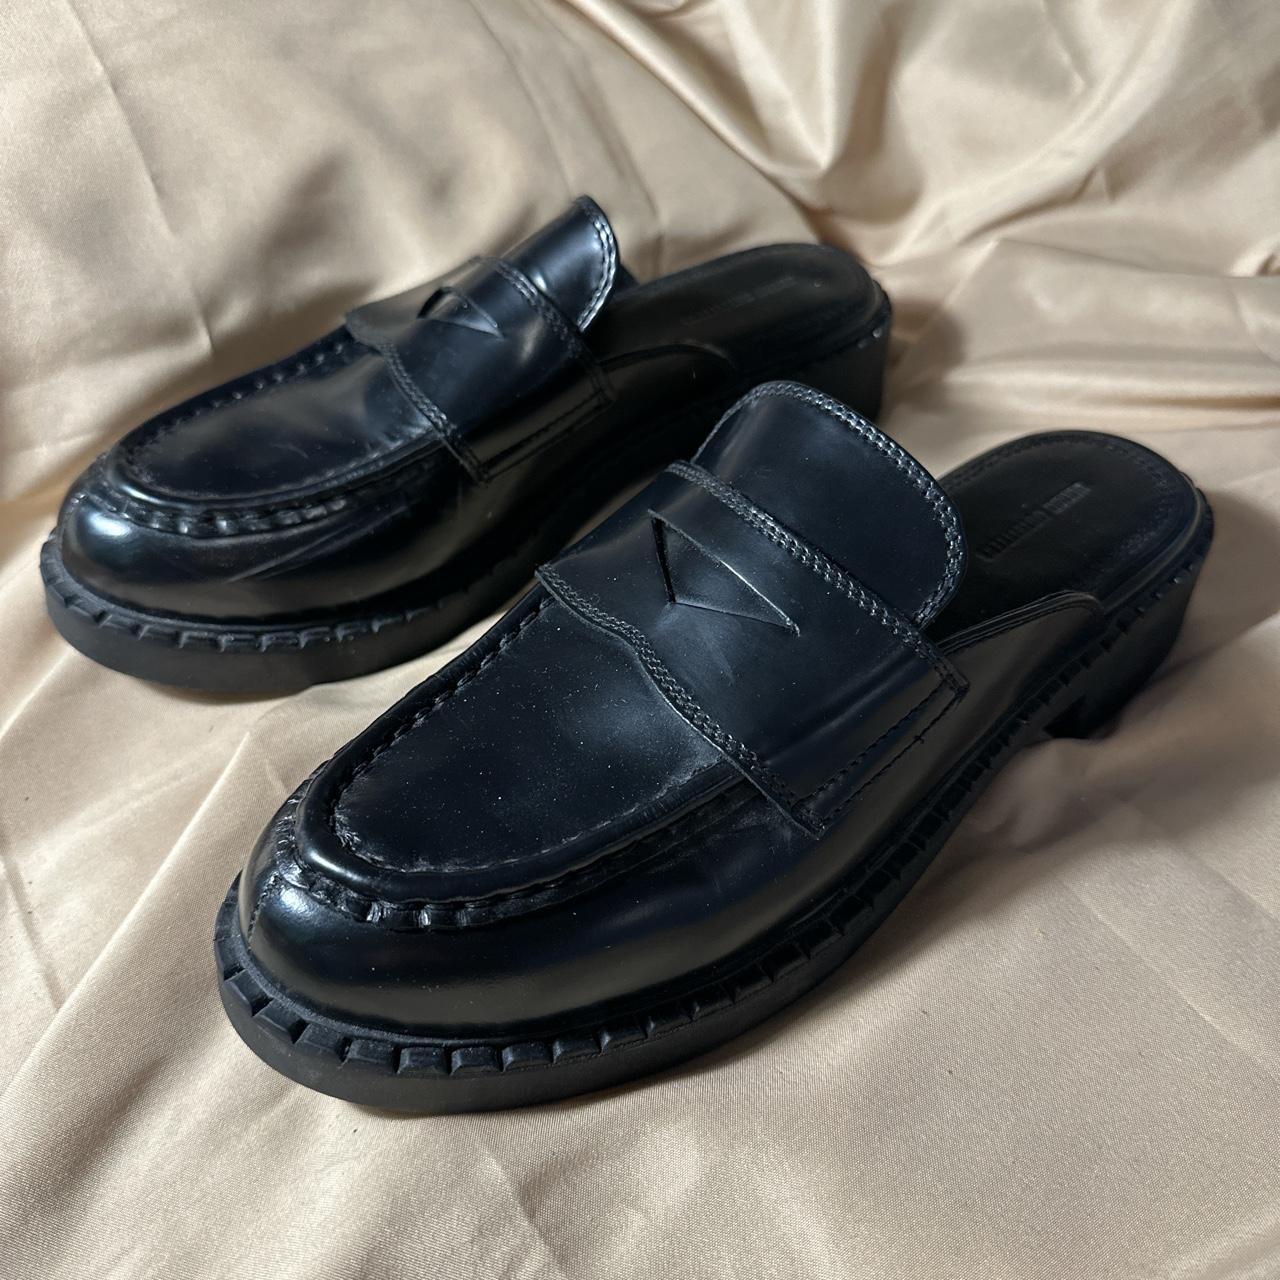 Loafer mules from Urban Outfitters Size 40 Worn a... - Depop